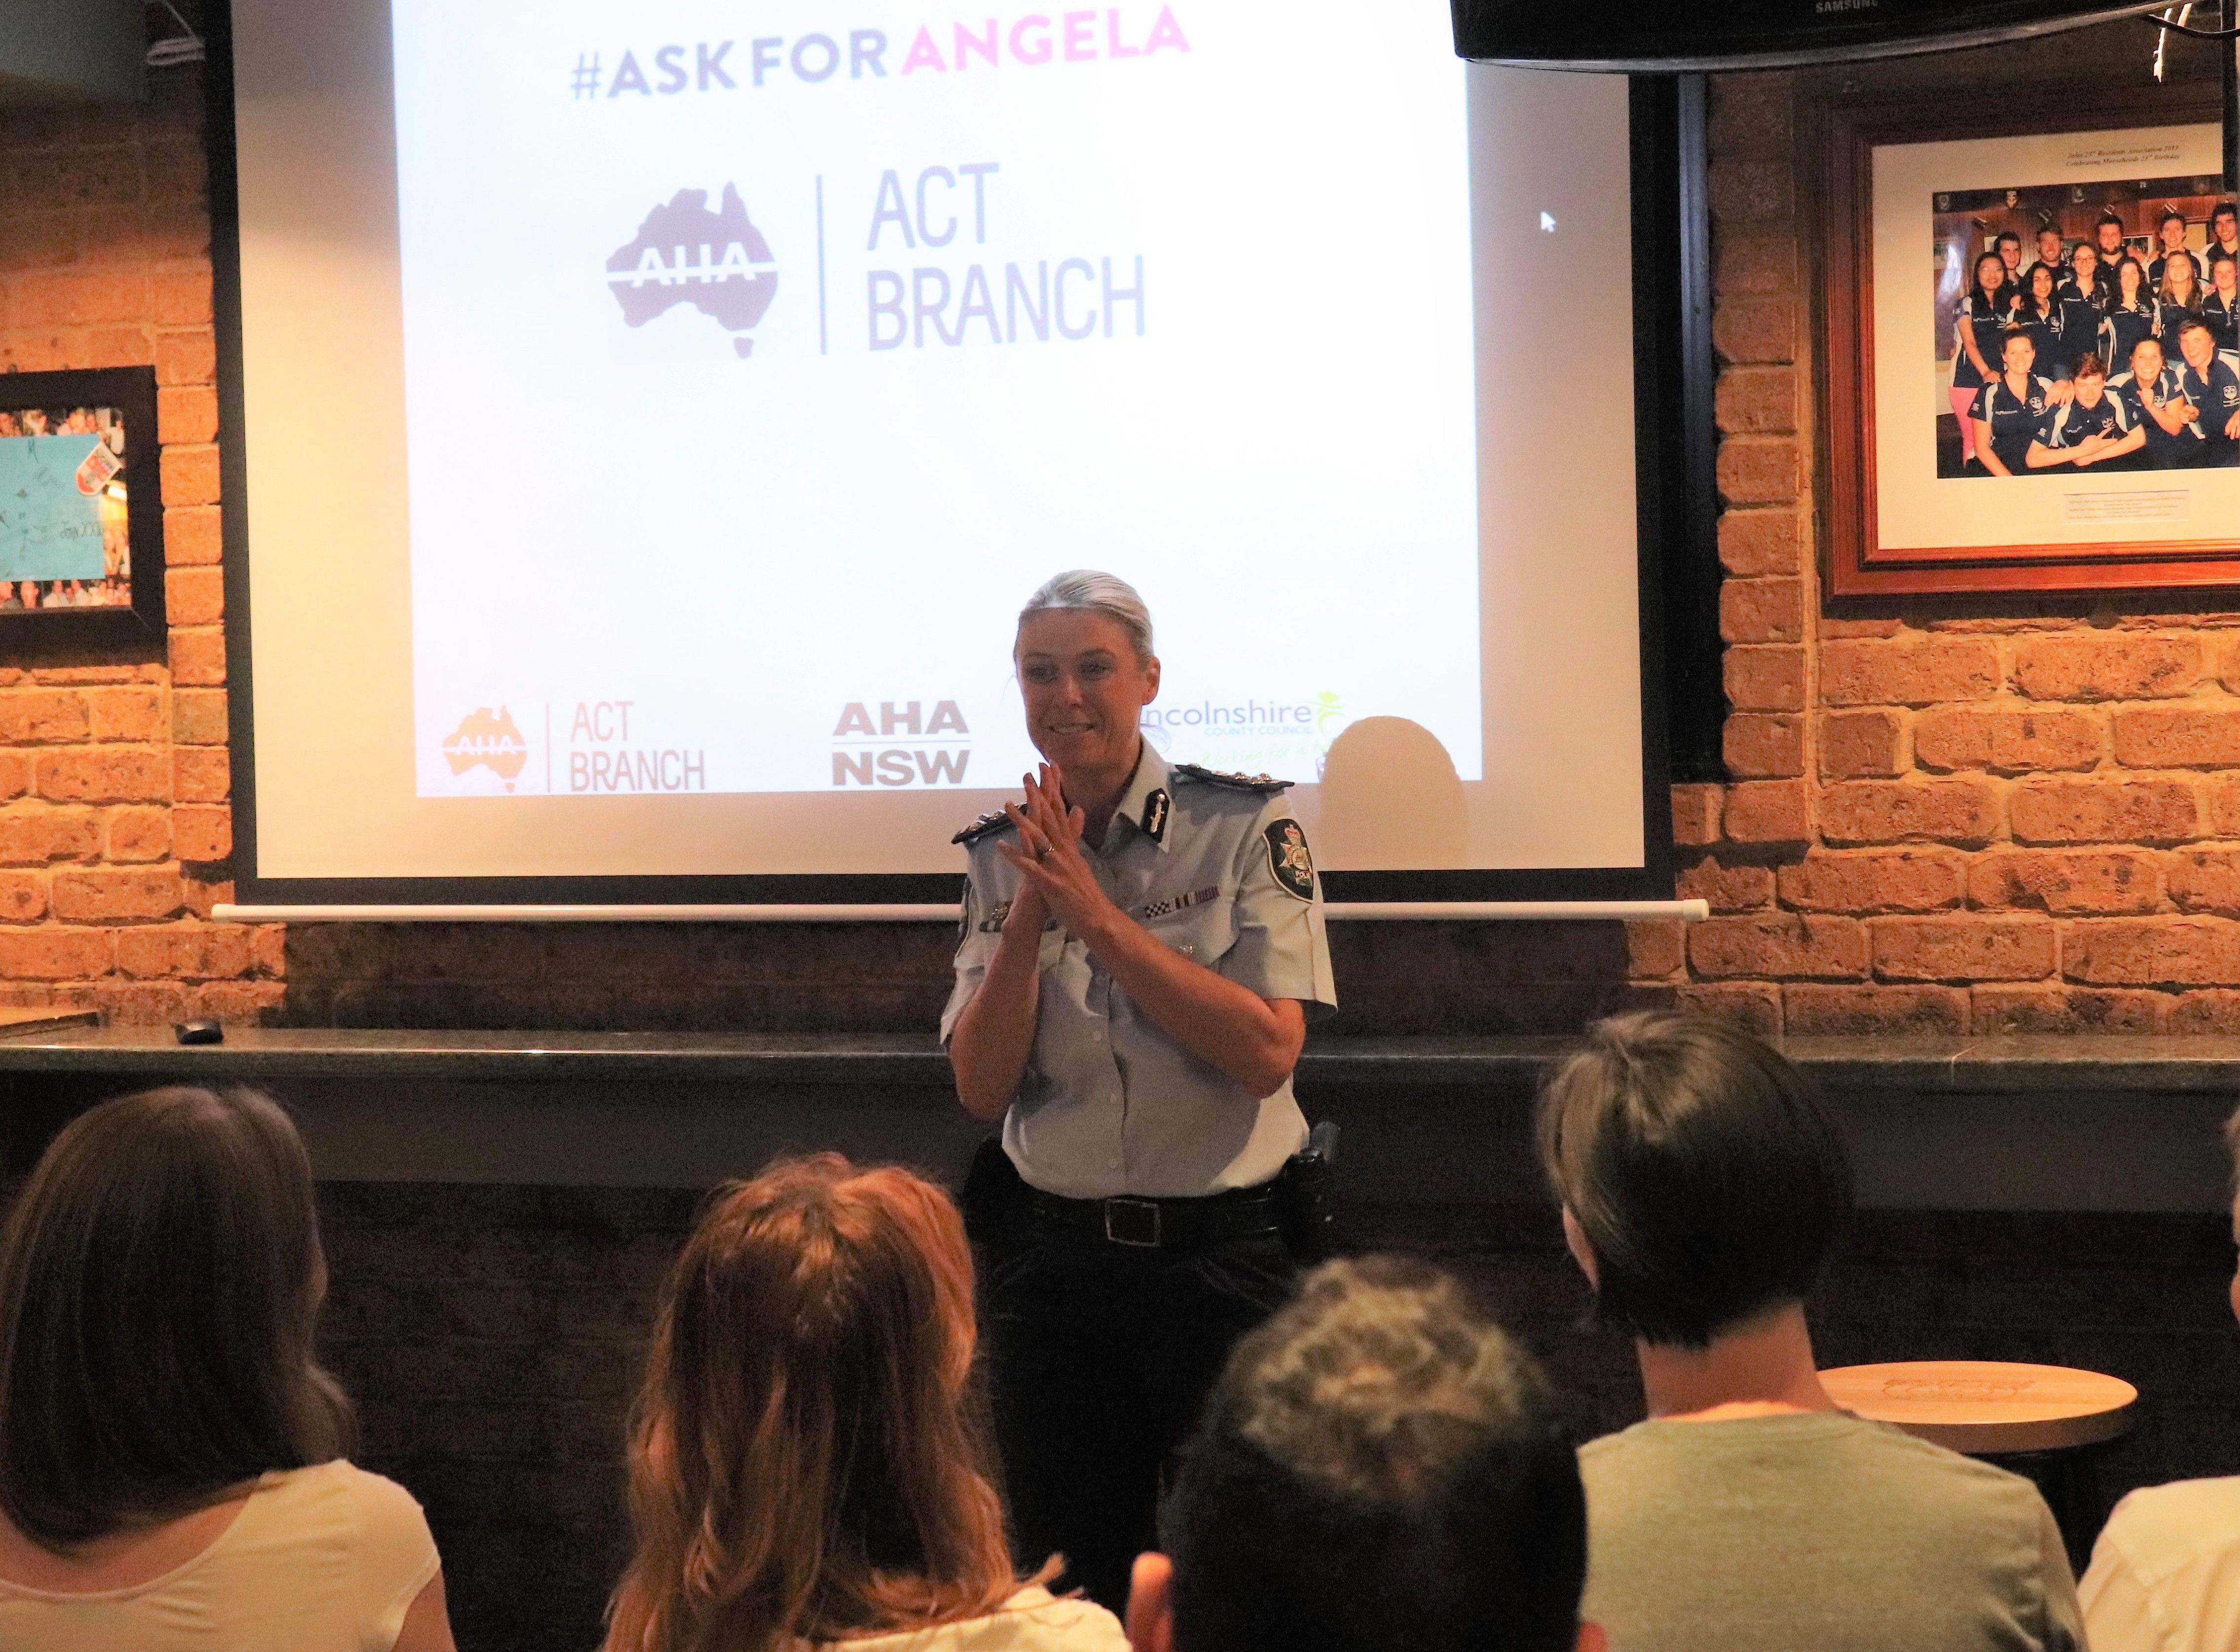 Campaign to prevent sexual violence urges patrons to 'Ask for Angela'